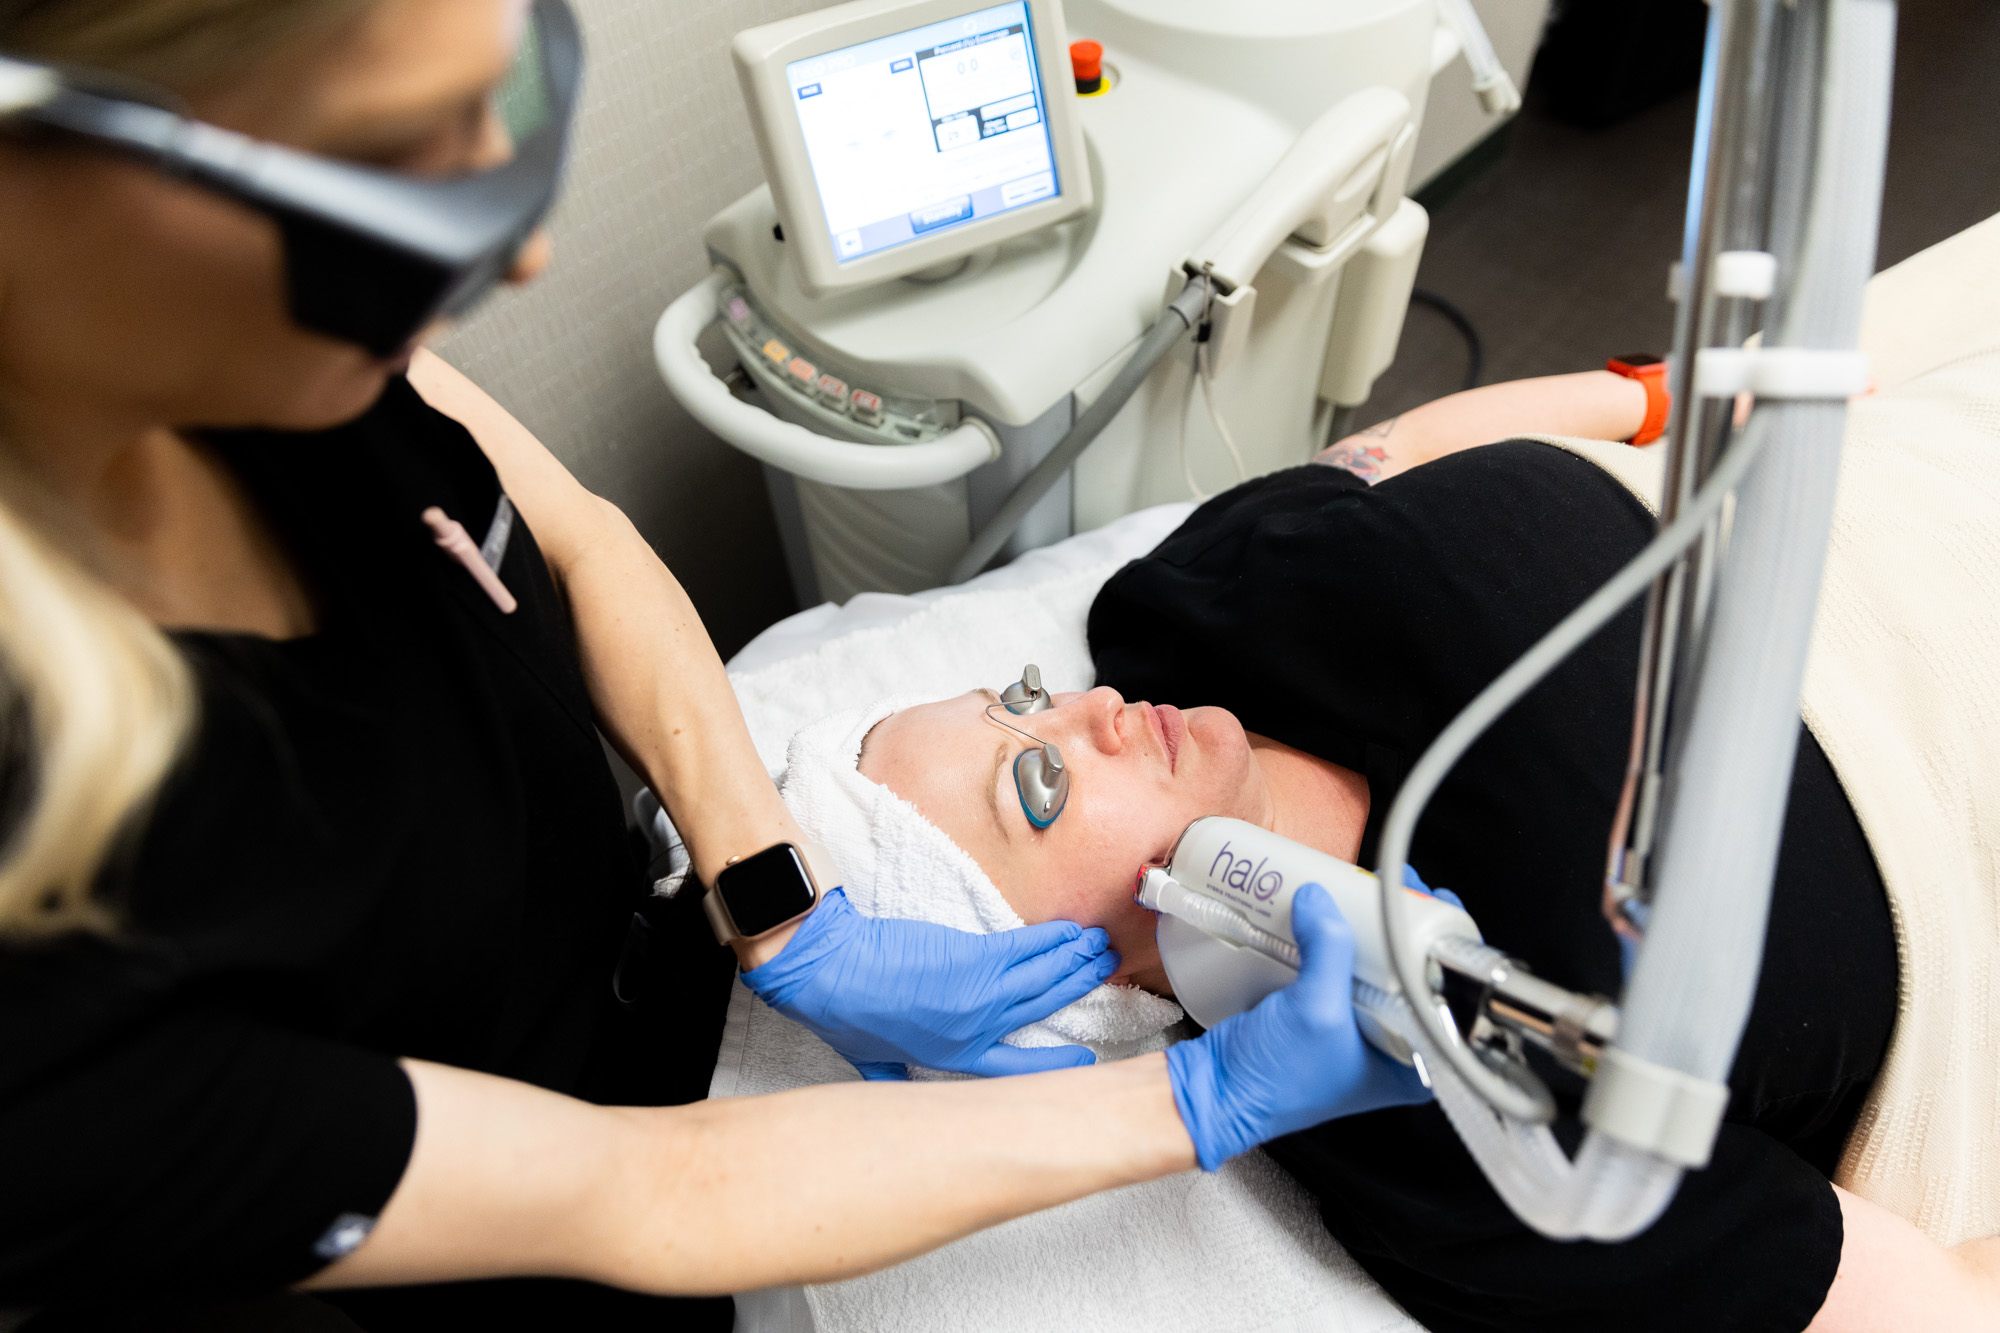 A Kansas City Skin and Cancer Center aesthetician holds the HALO treatment device against the female client's right jawline. The client is lying down with protective eye coverings on.